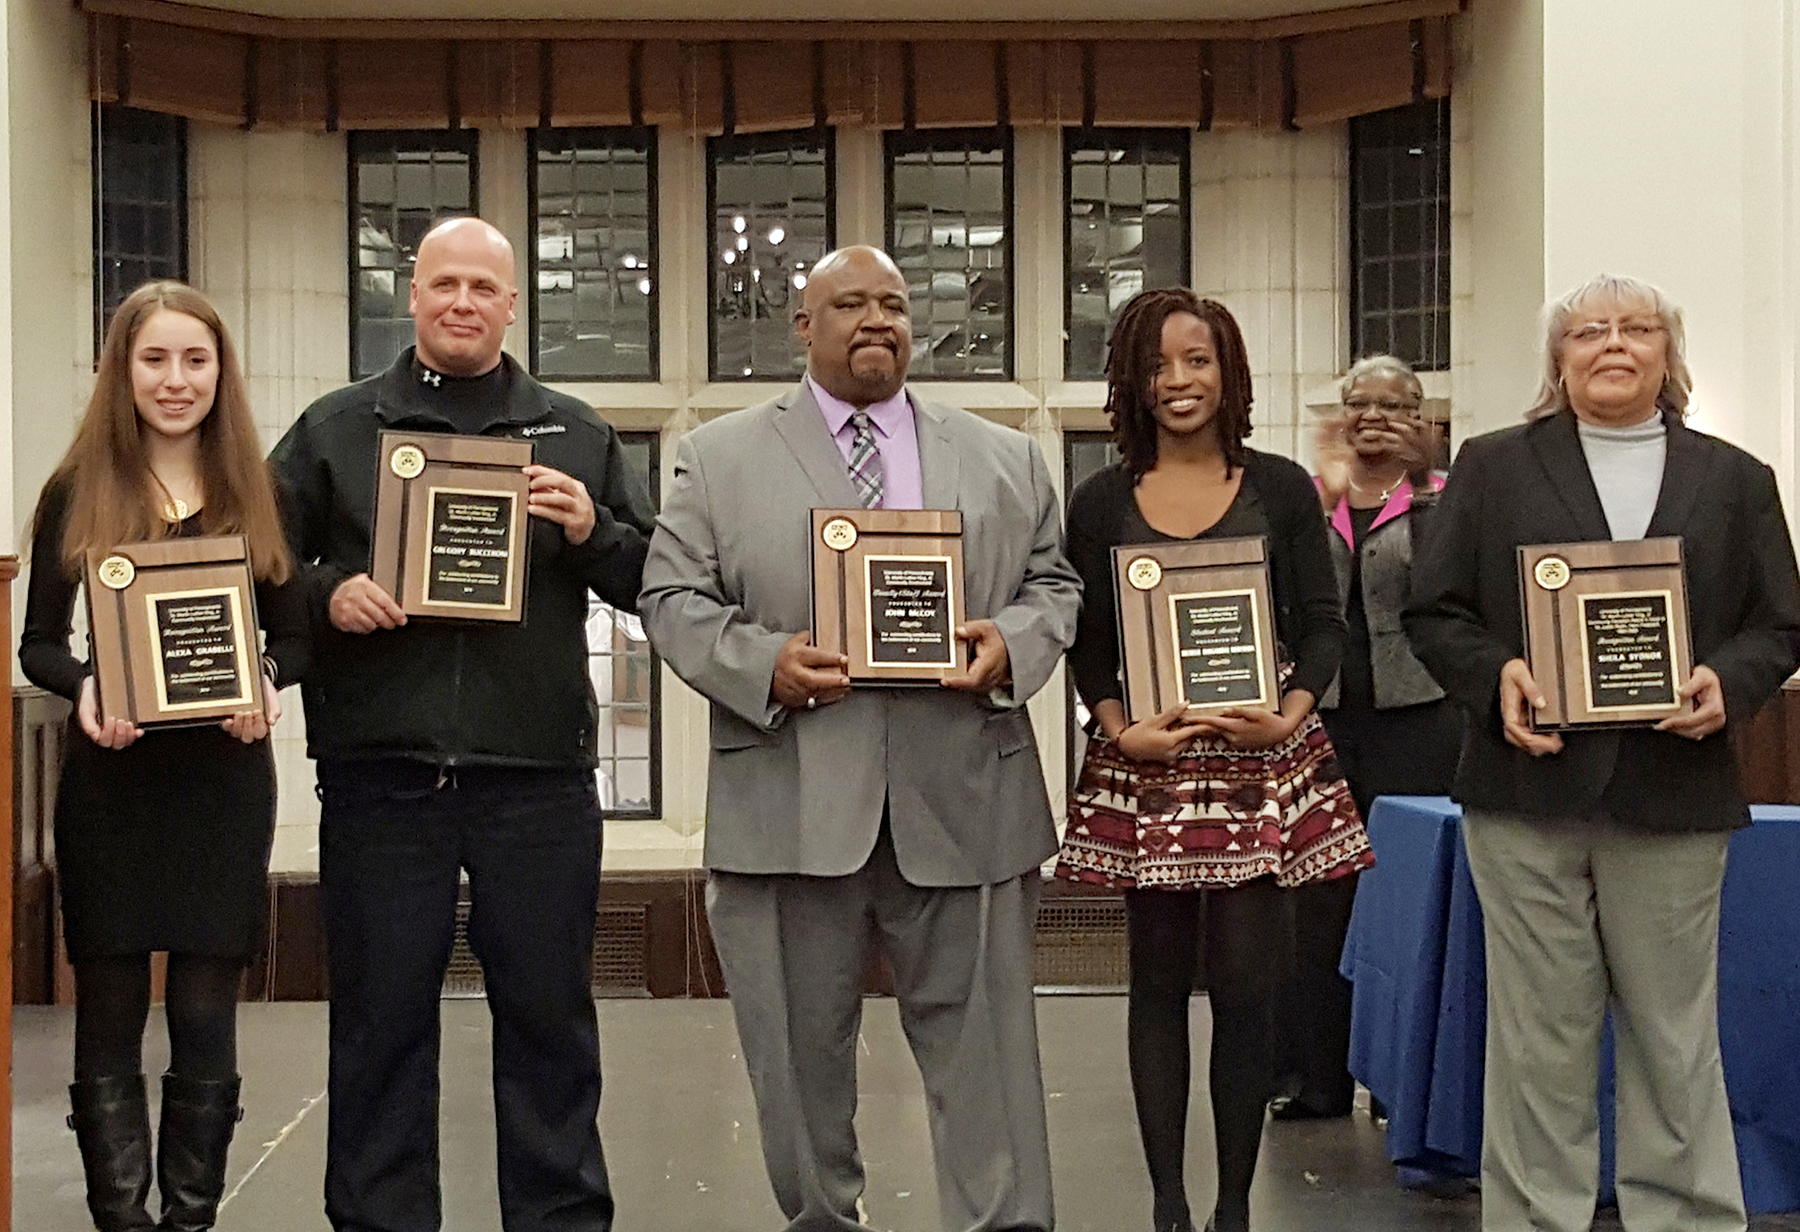 caption: From left to right: the five recipients of the 2016 awards: Alexa Grabelle, Gregory Bucceroni, John McCoy, Michelle Rungamirai Munyikwa and Sheila A. Sydnor.